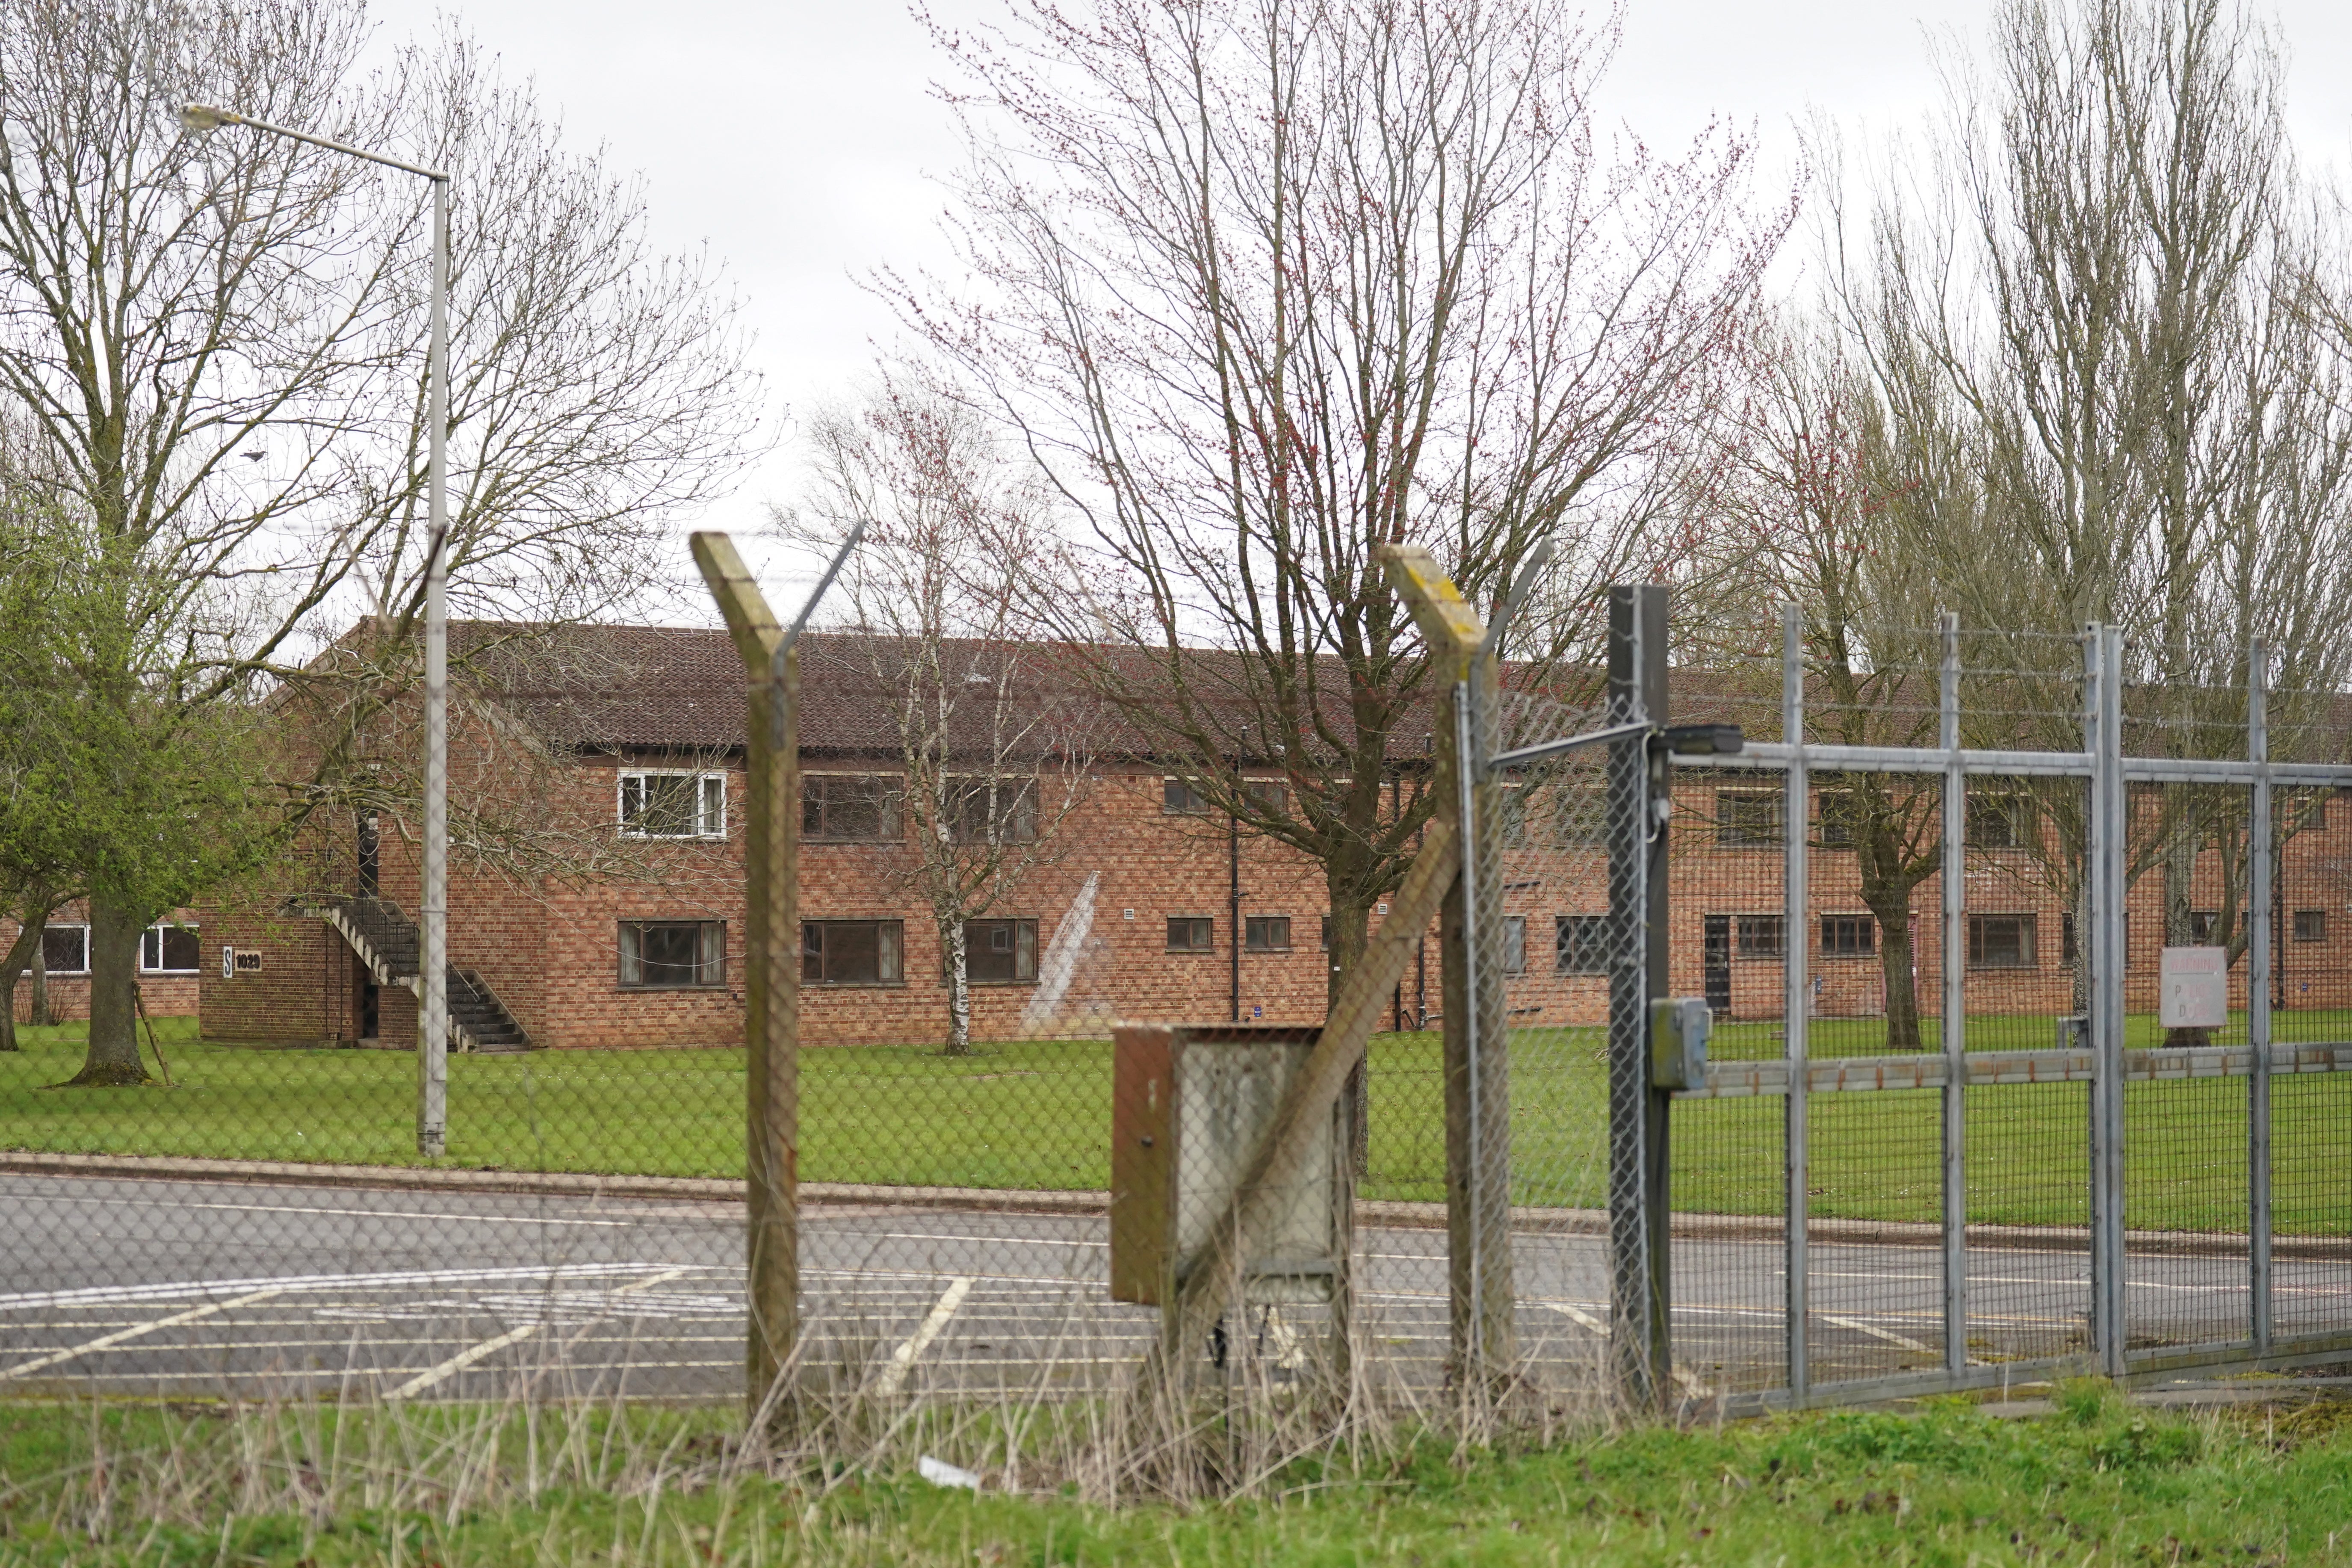 Asylum seekers at Wethersfield airbase have described it as being ‘like a prison’